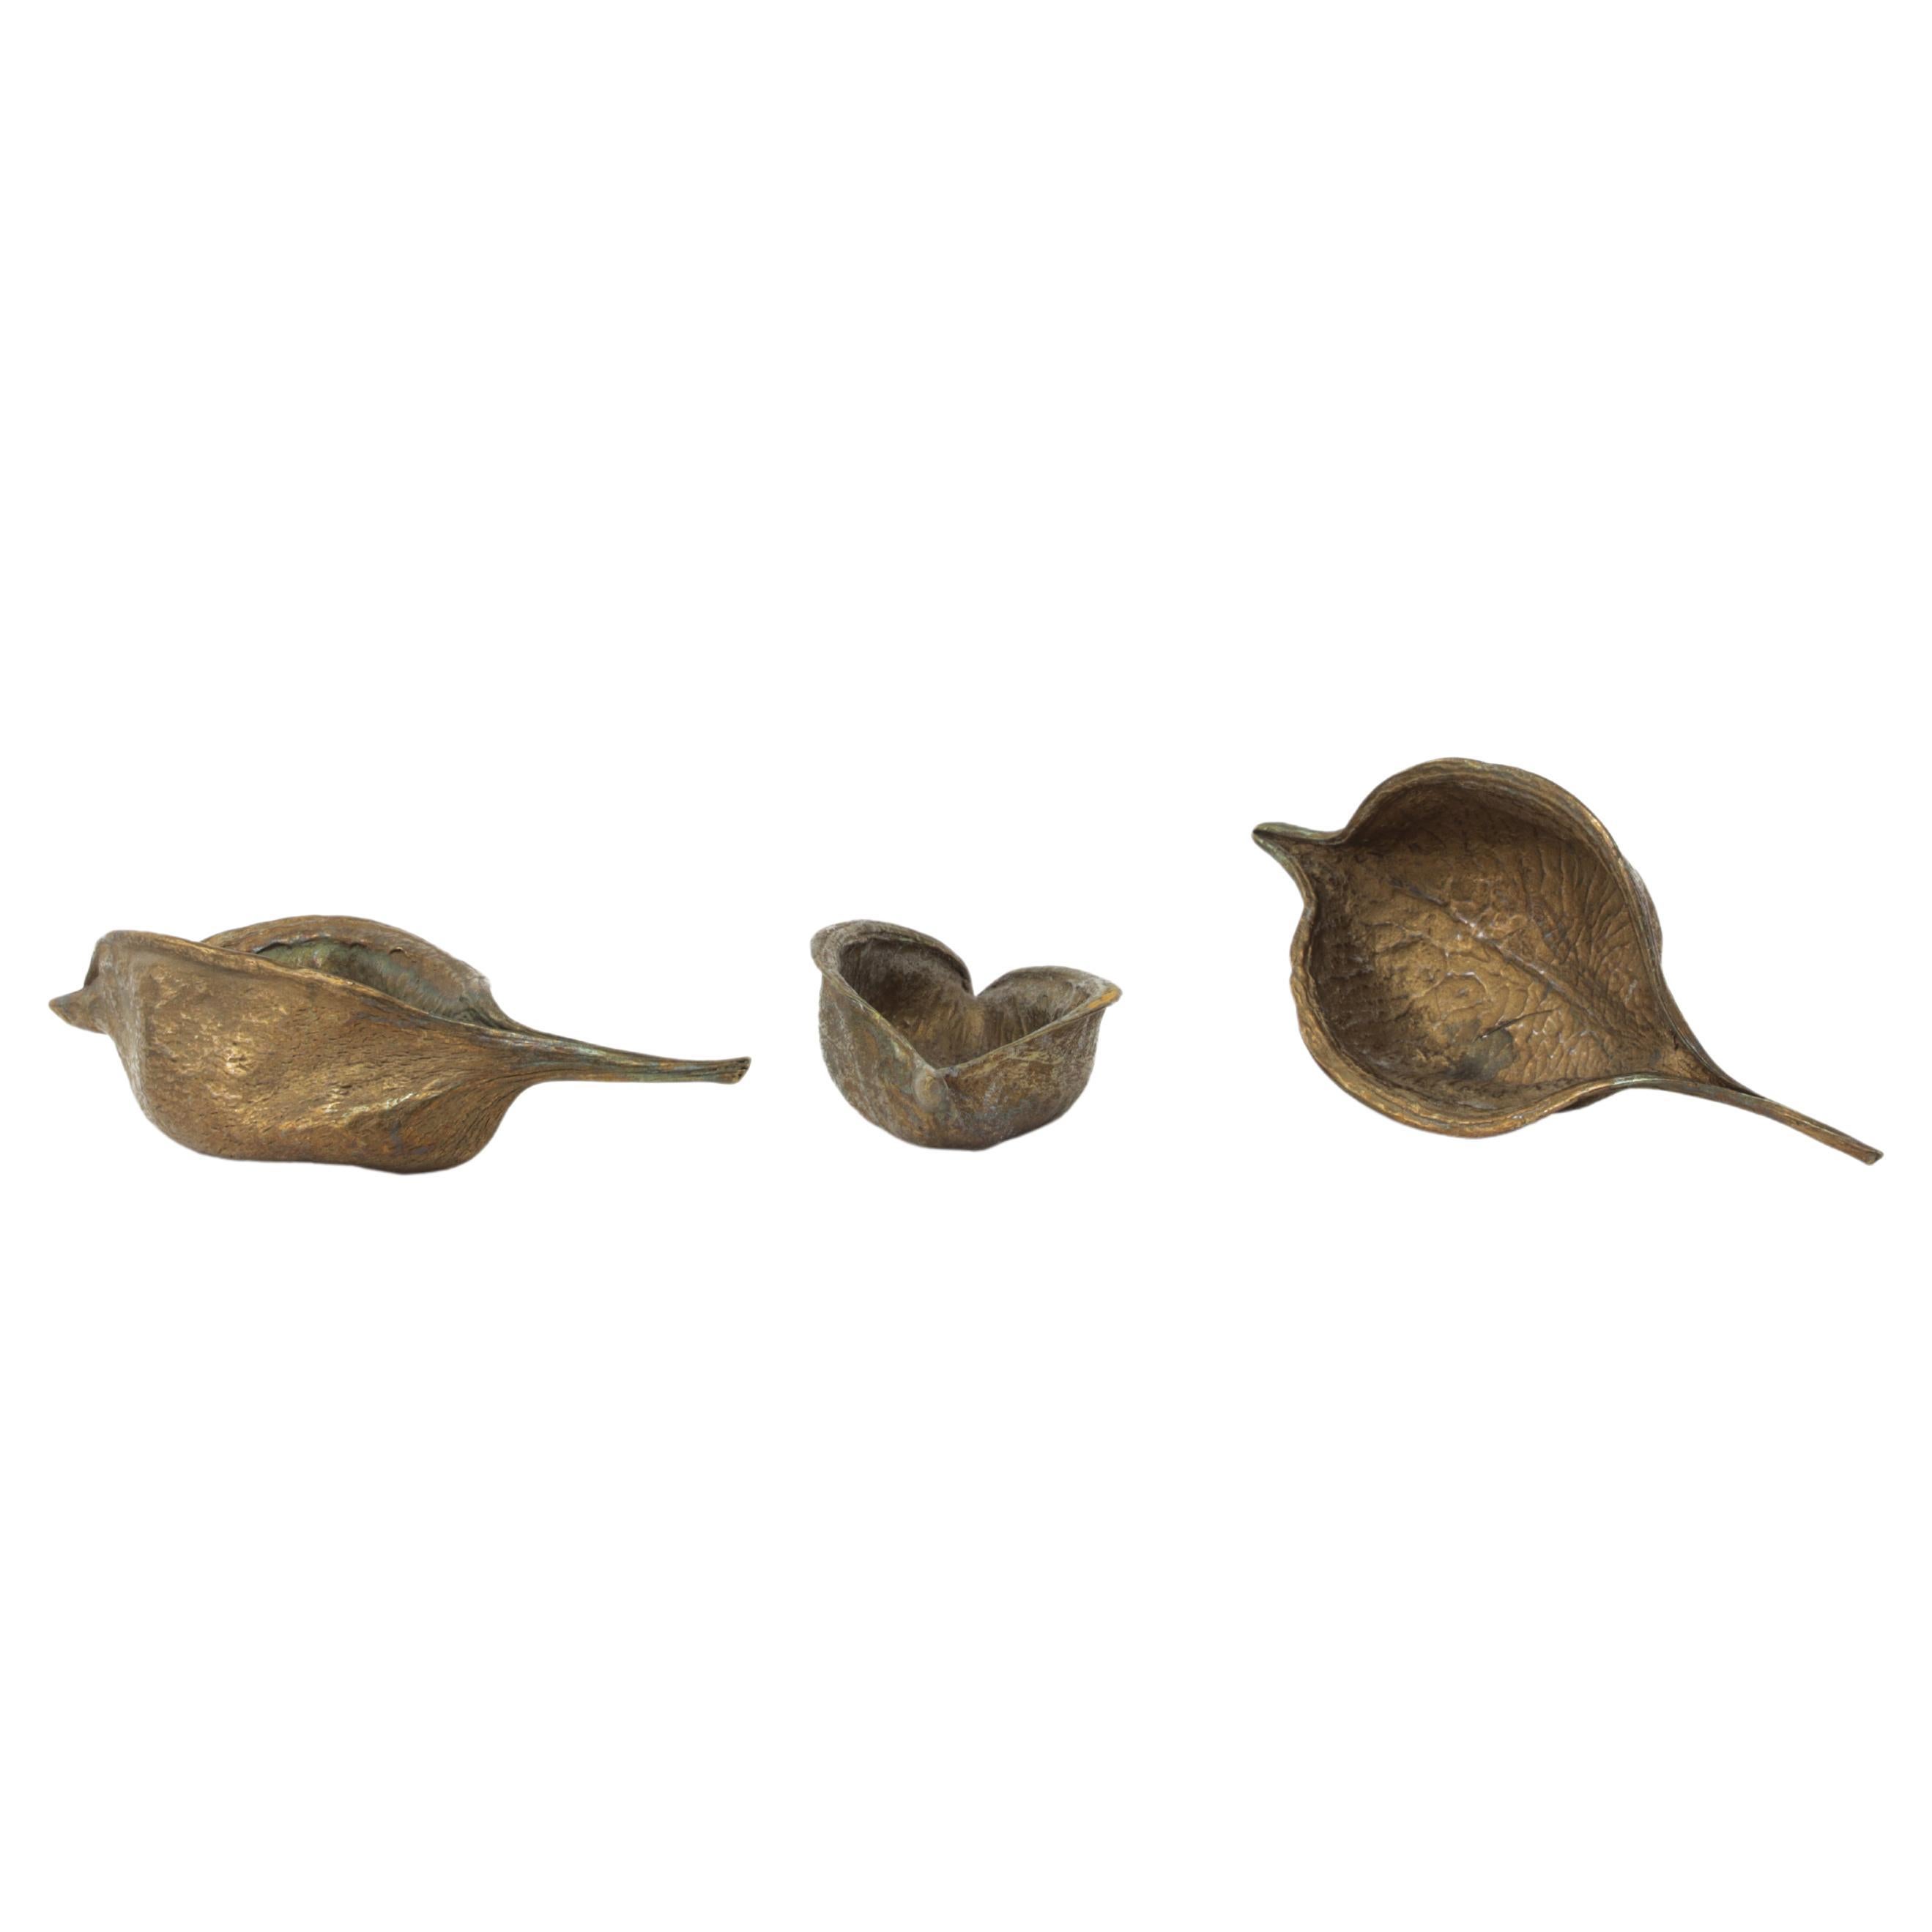 Set of 3 cast bronze seed pods. The can be used for salt and spices at the dining table or for jewelry and small things. Use your imagination!
Made in Los Angeles.